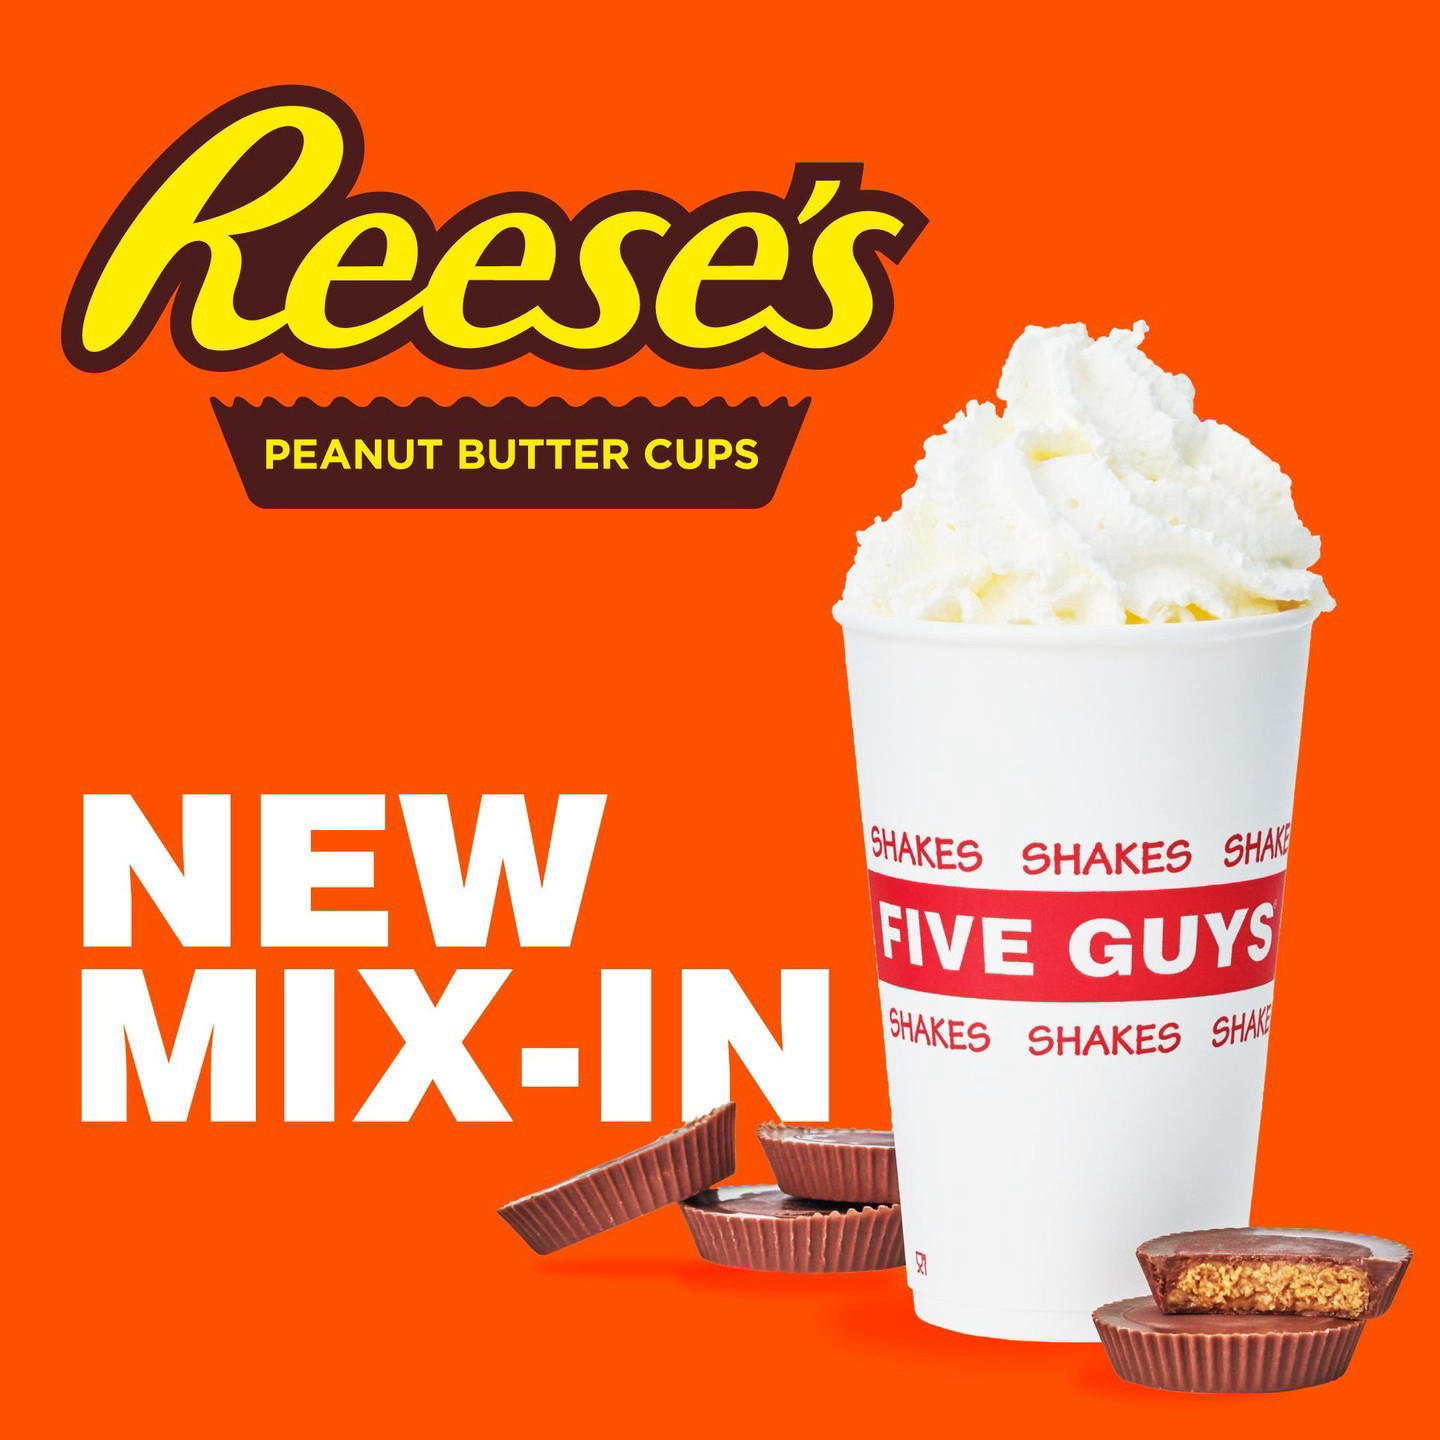 Five Guys - We have teamed up with REESE'S to create the perfect milkshake